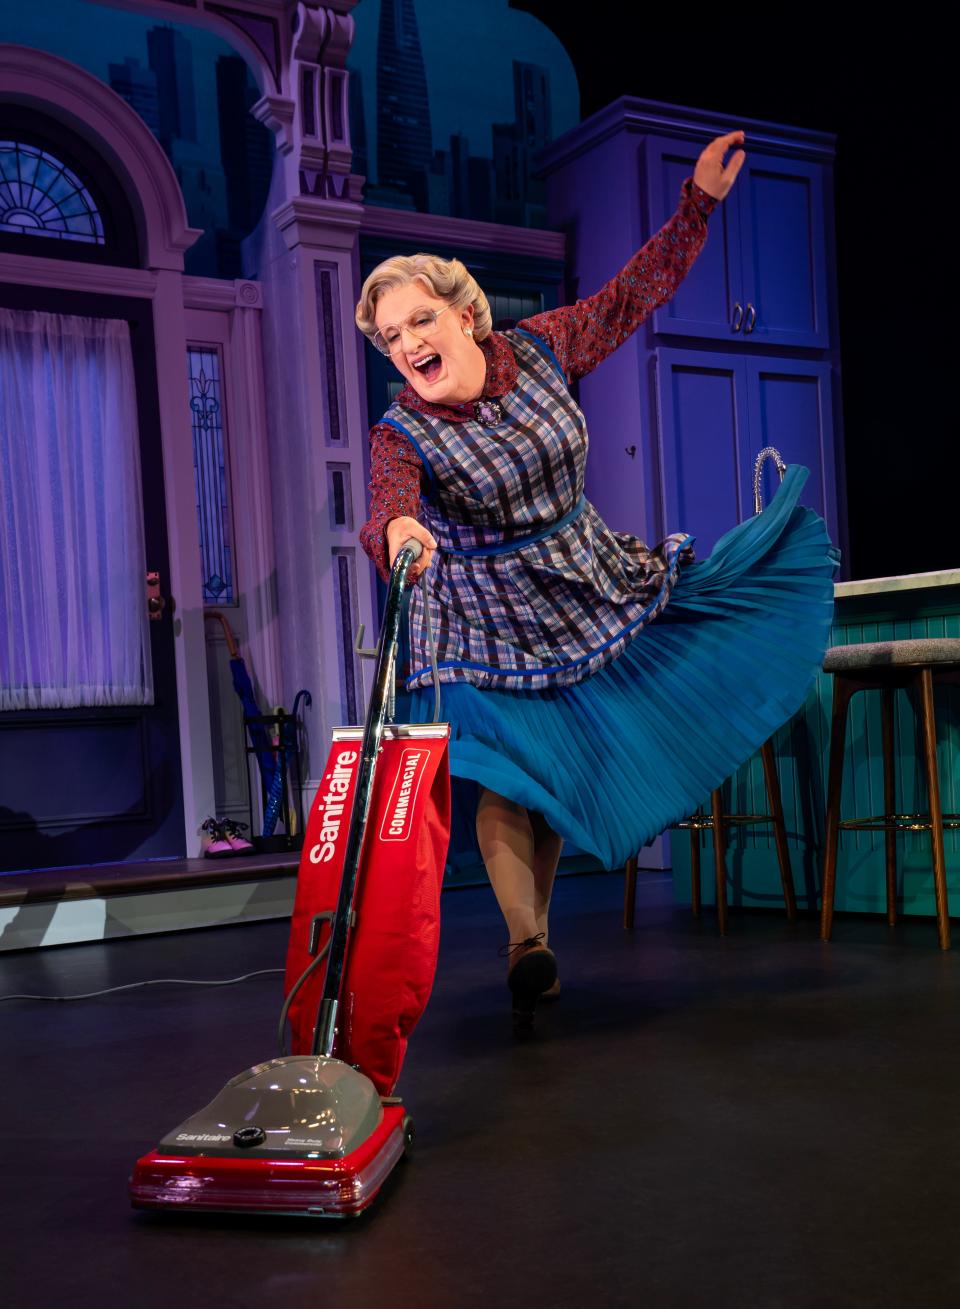 Rob McClure reprises his Tony-nominated Broadway role as the title character in "Mrs. Doubtfire" in the national tour, which plays at Playhouse Square Tuesday through Jan. 28.